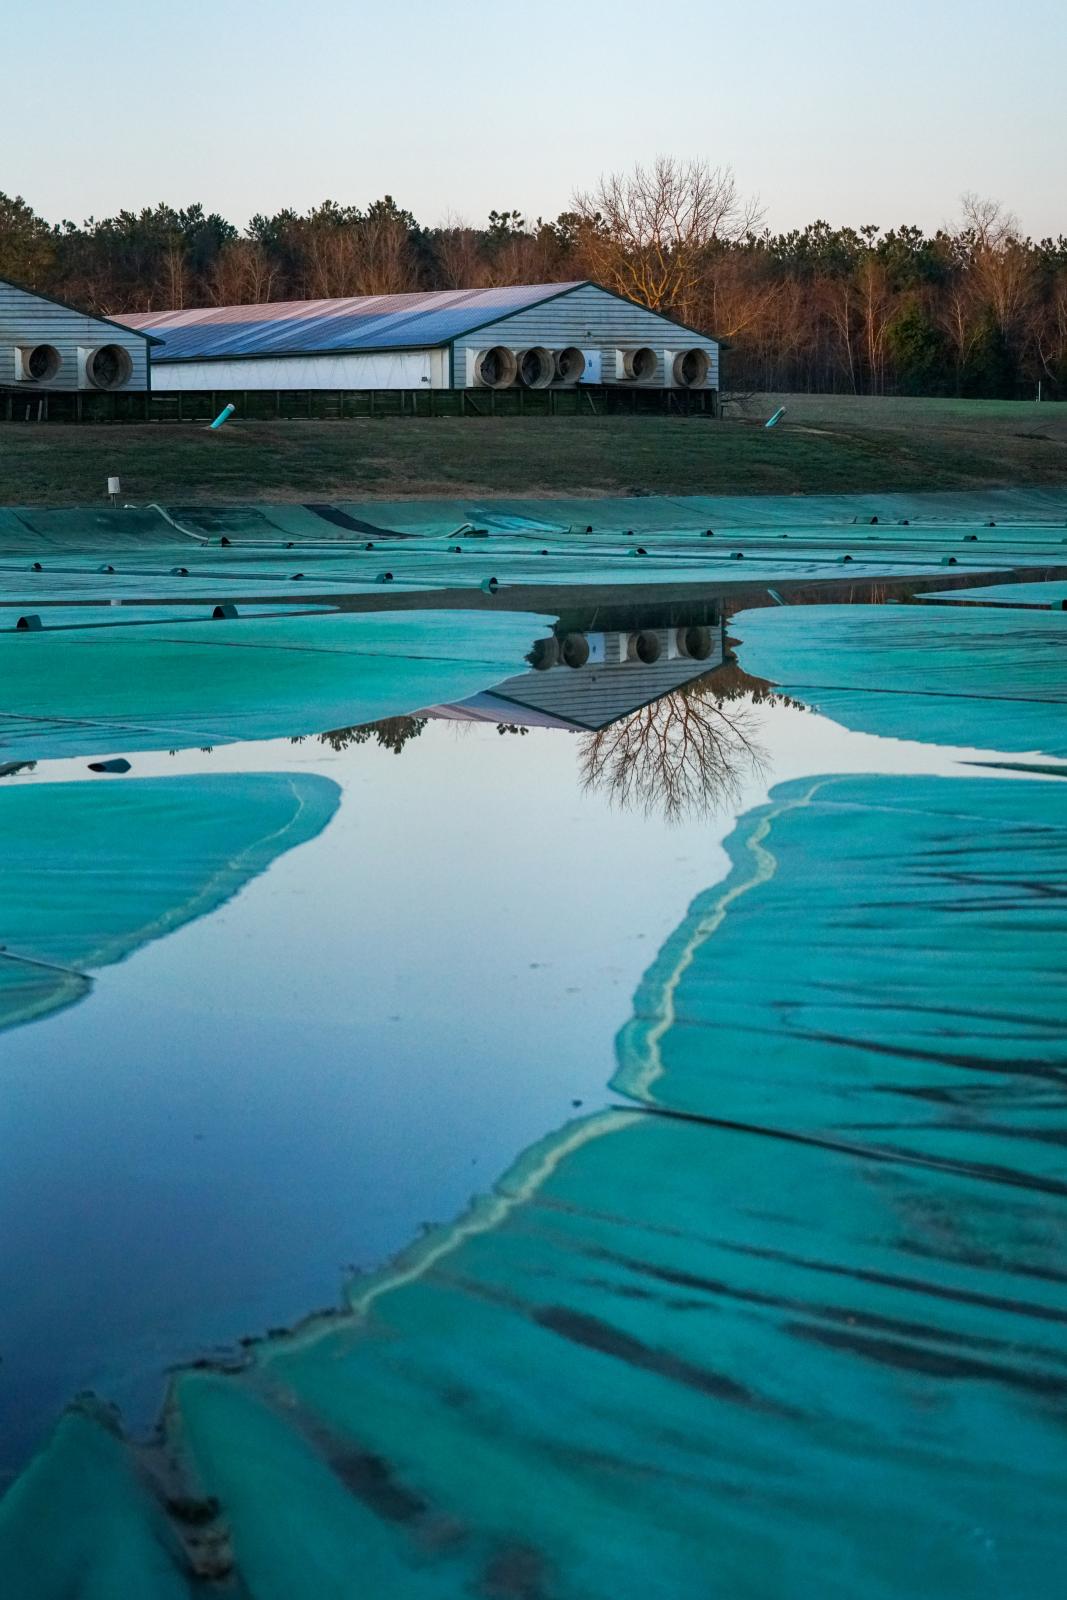 BioGas  - An irritagion lagoon is coverent by a tarp to conceal the...